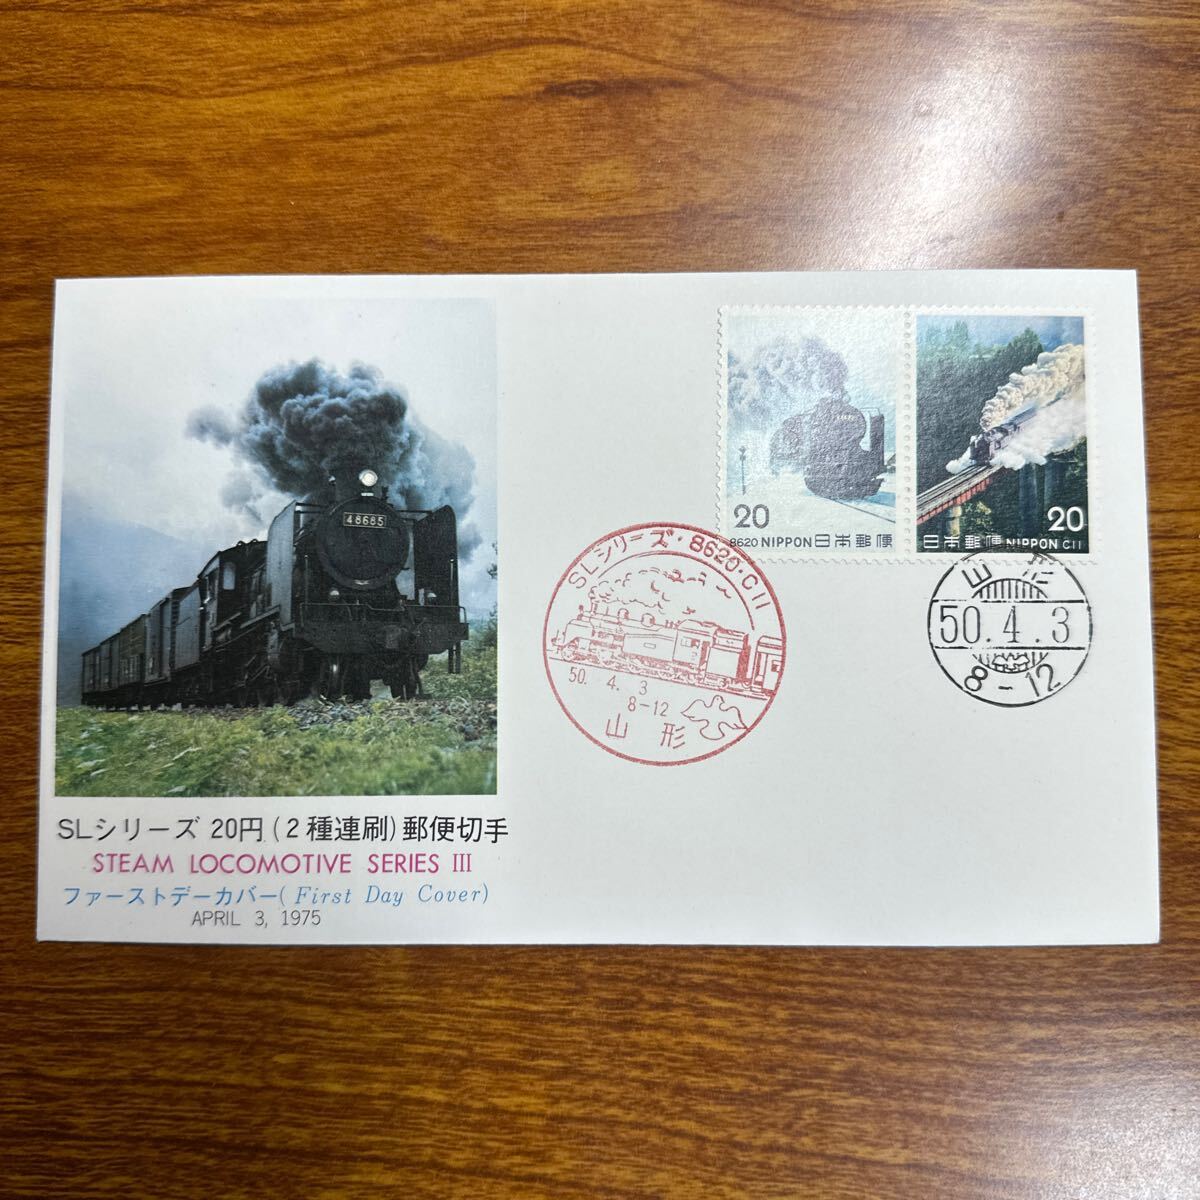  First Day Cover SL series no. 3 compilation Showa era 50 year issue memory seal 